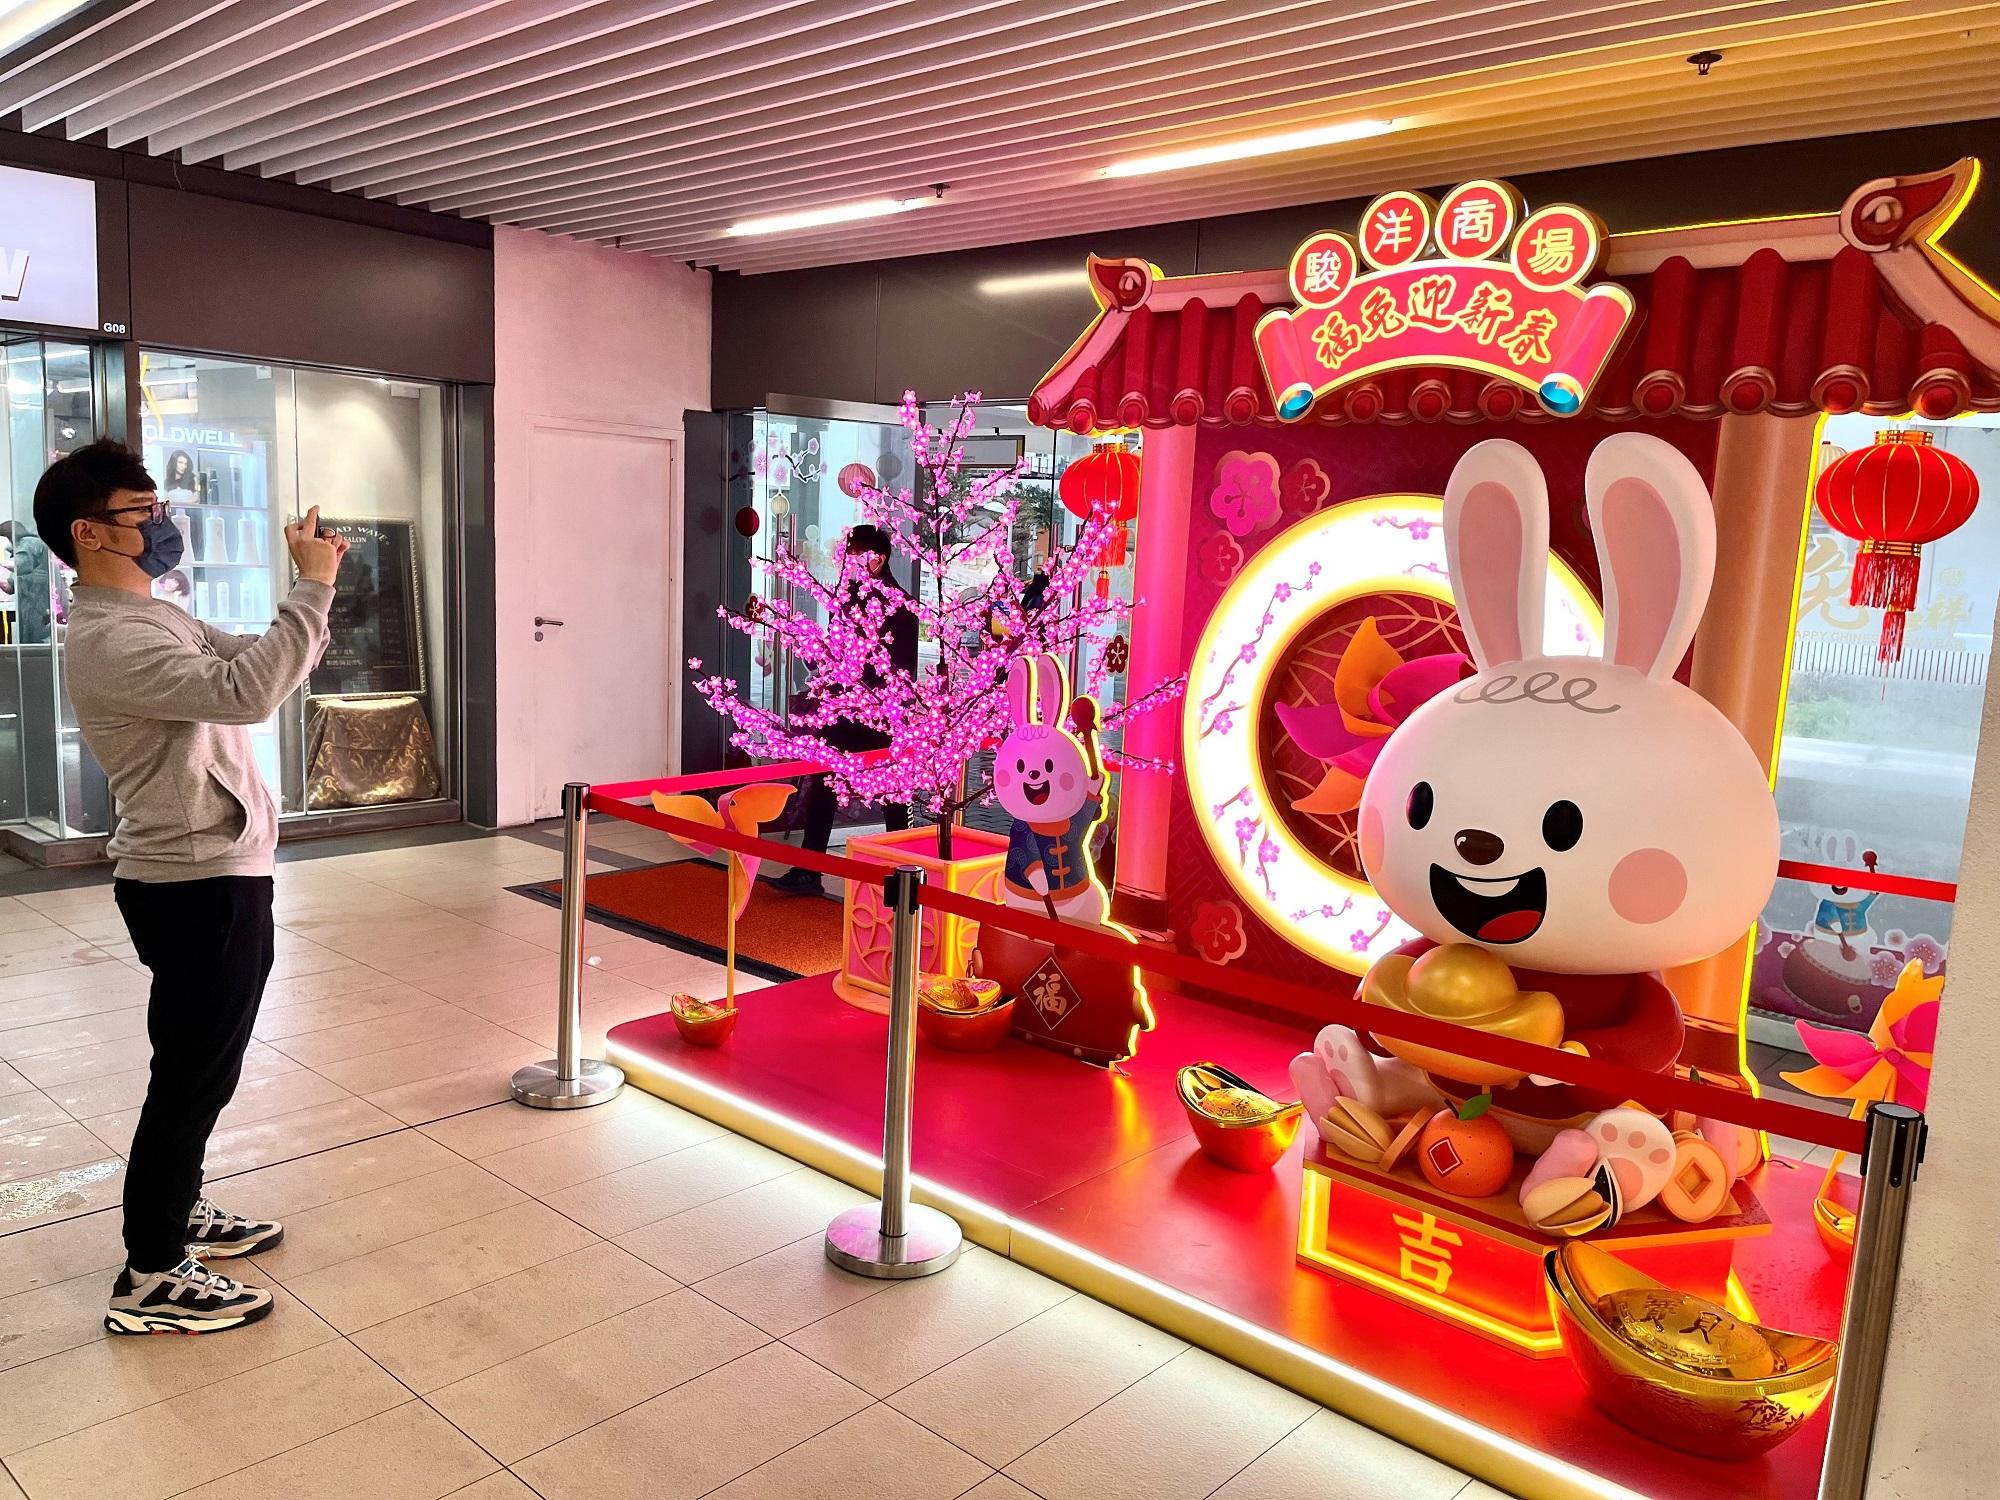 The Hong Kong Housing Authority has put up festive new year decorations at Chun Yeung Shopping Centre, Sha Tin, to bring customers and members of the public good vibes for the Lunar New Year as well as provide them with photo-shooting spots.